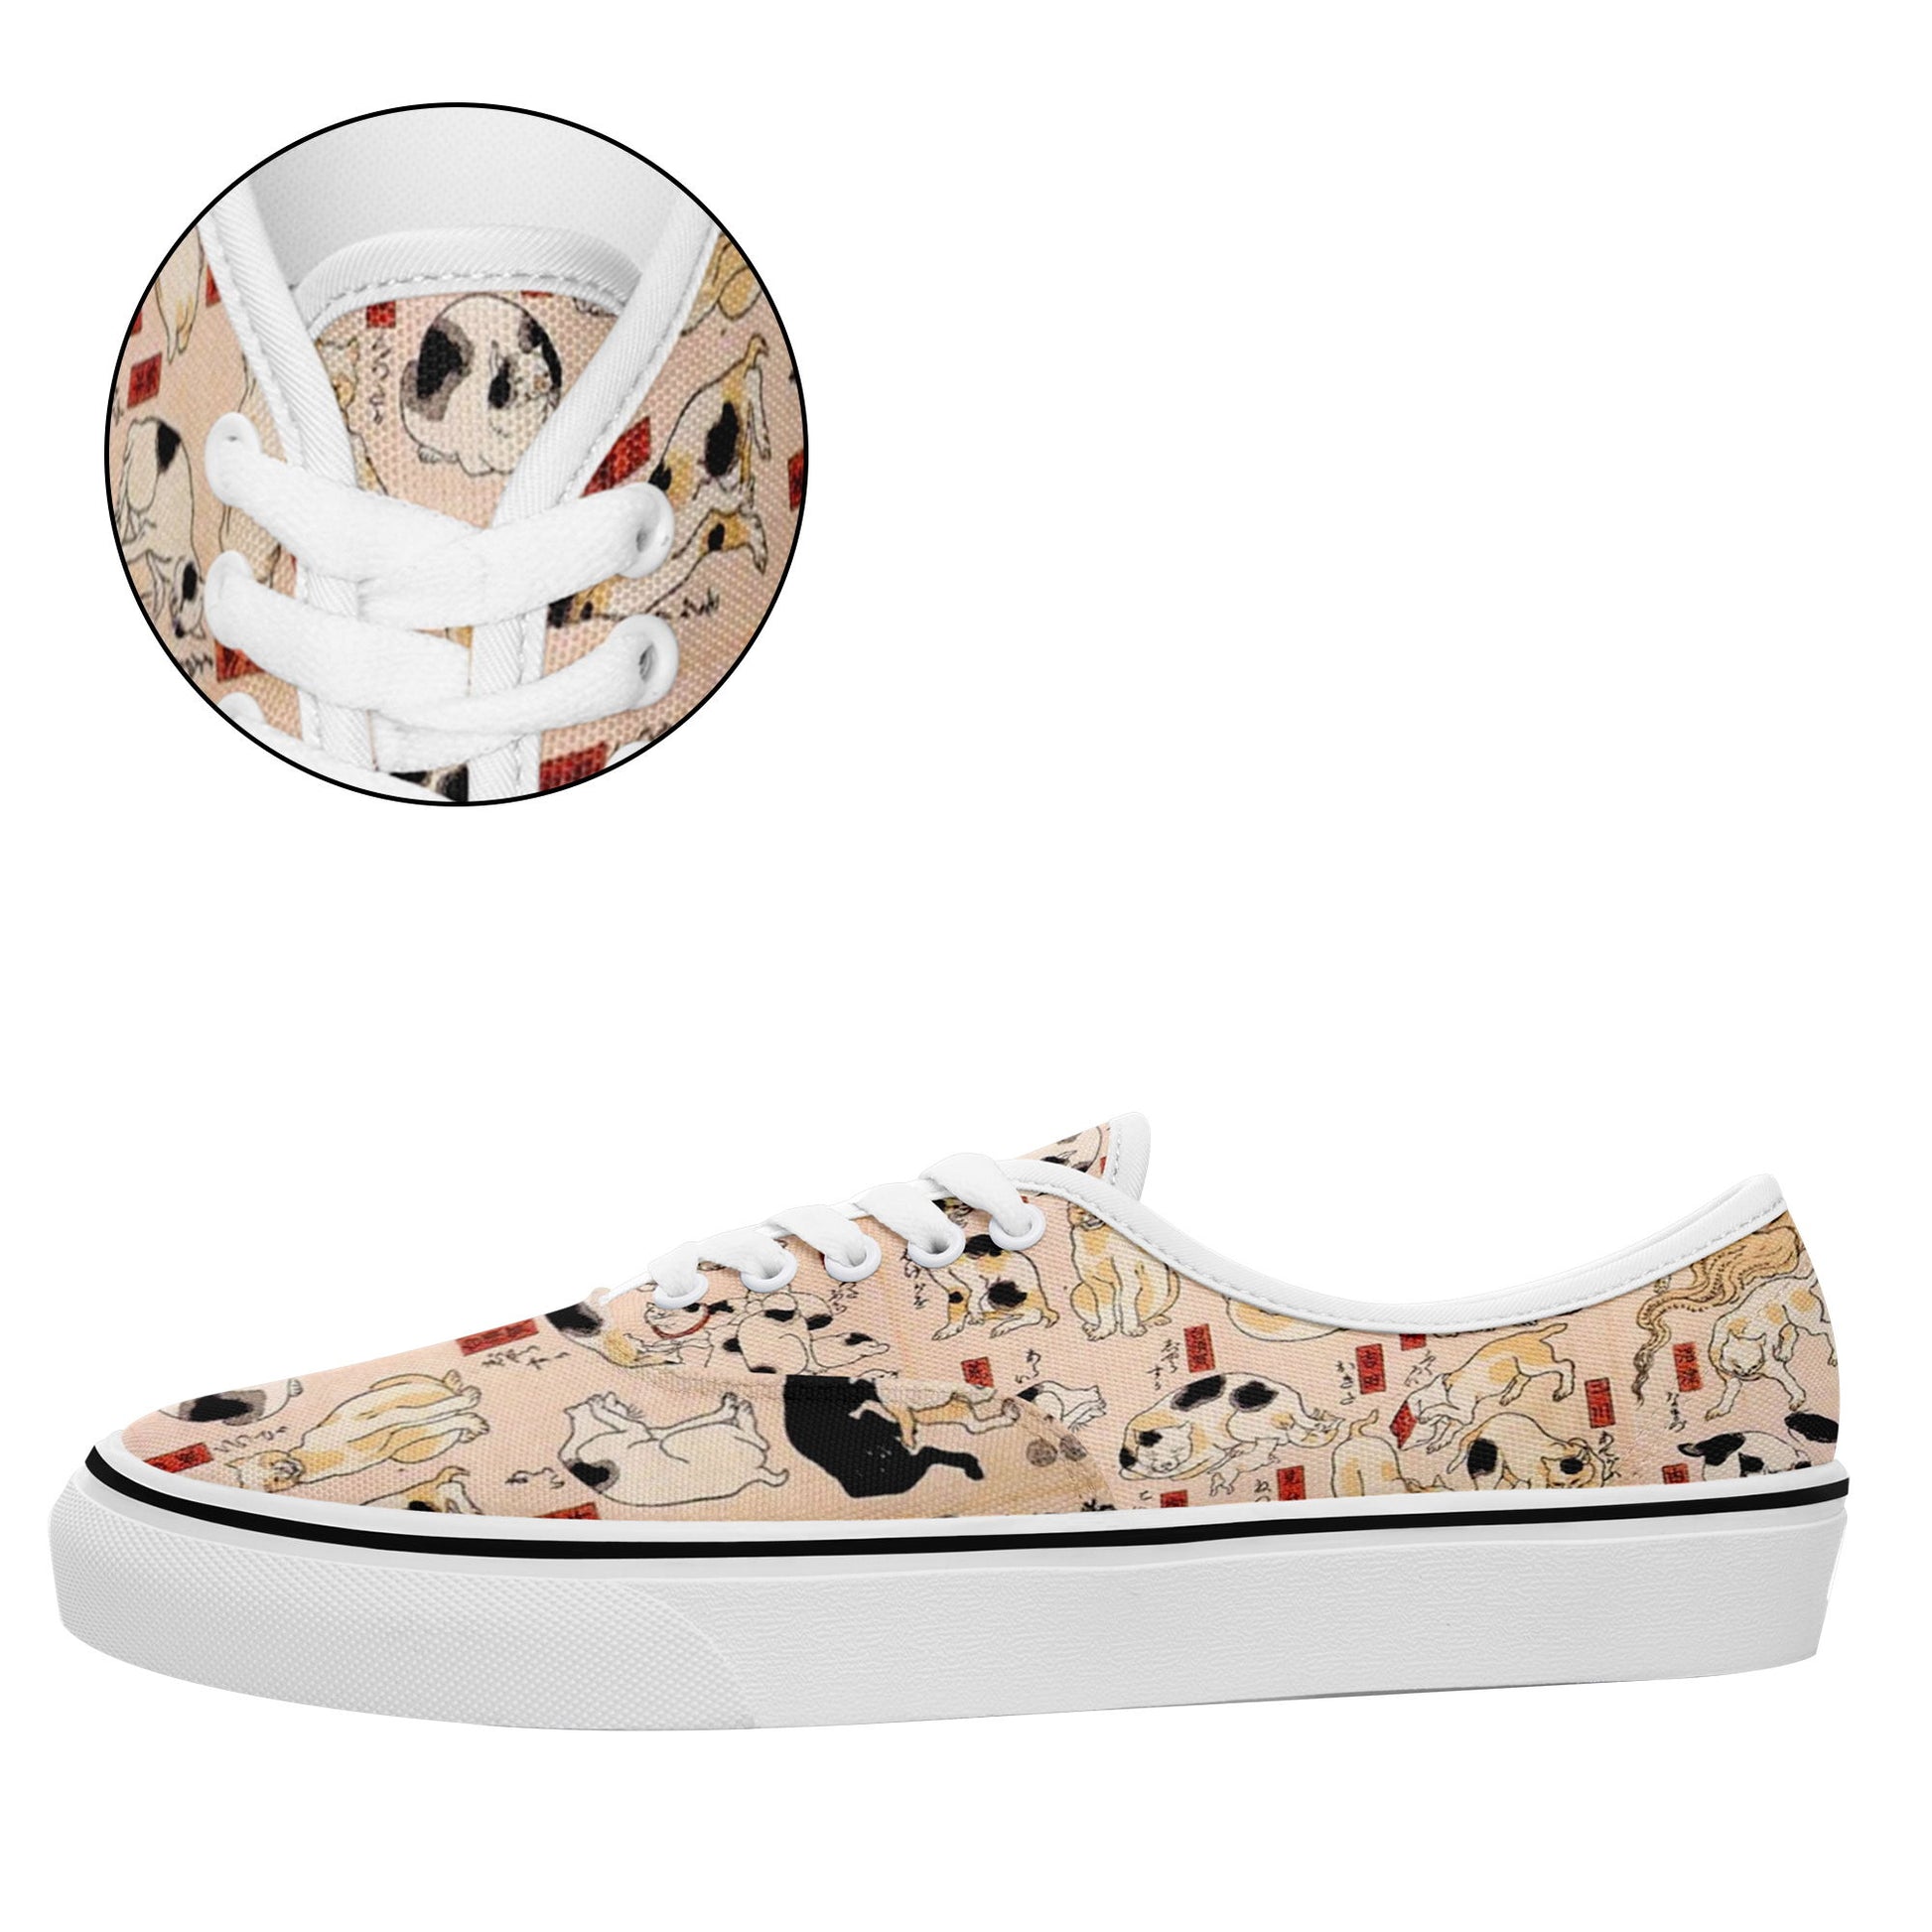 customize printed casual shoes 7213 with retro art ukiyo-e kuniyoshi utagawa's cats suggested as the fifty three stations of the tokaido sneakers white soles 6